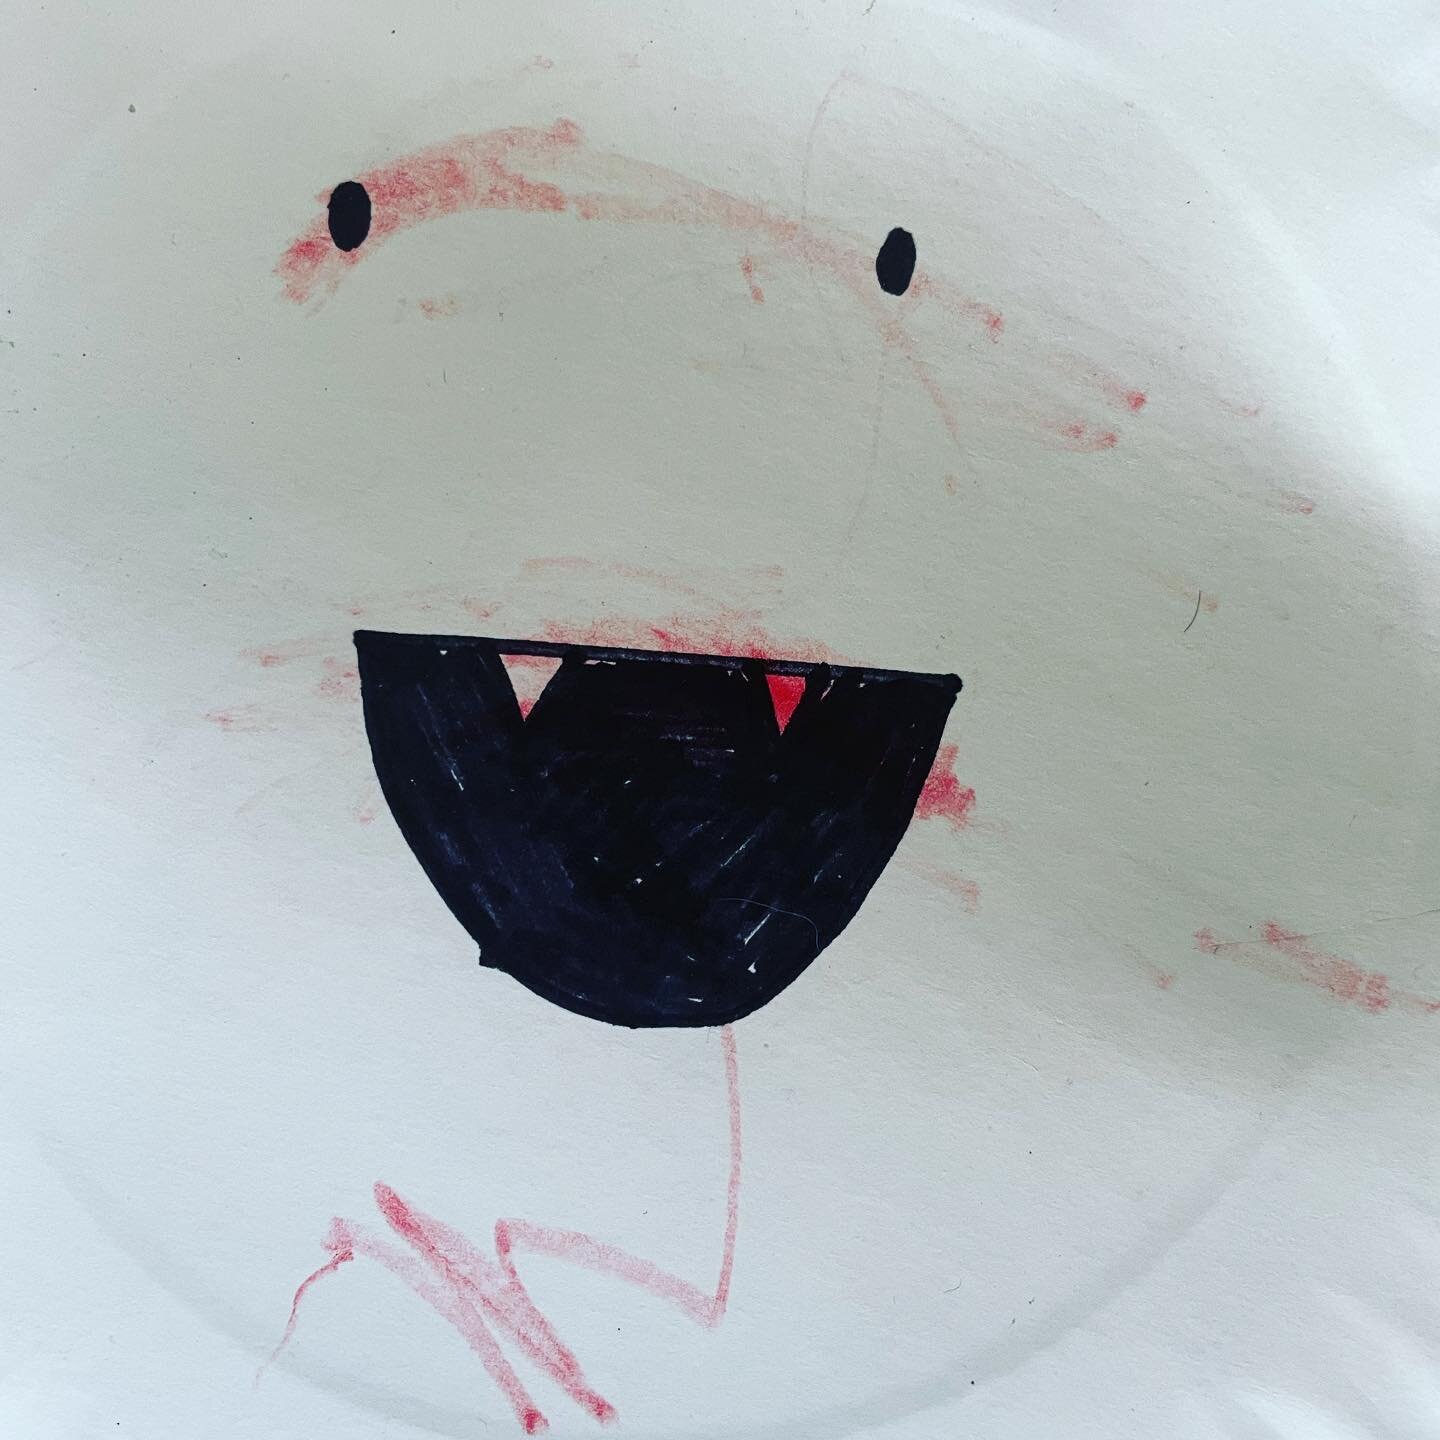 The two-yr-old grabbed a hold of the vampire paper plate &amp; took it to a whole other level